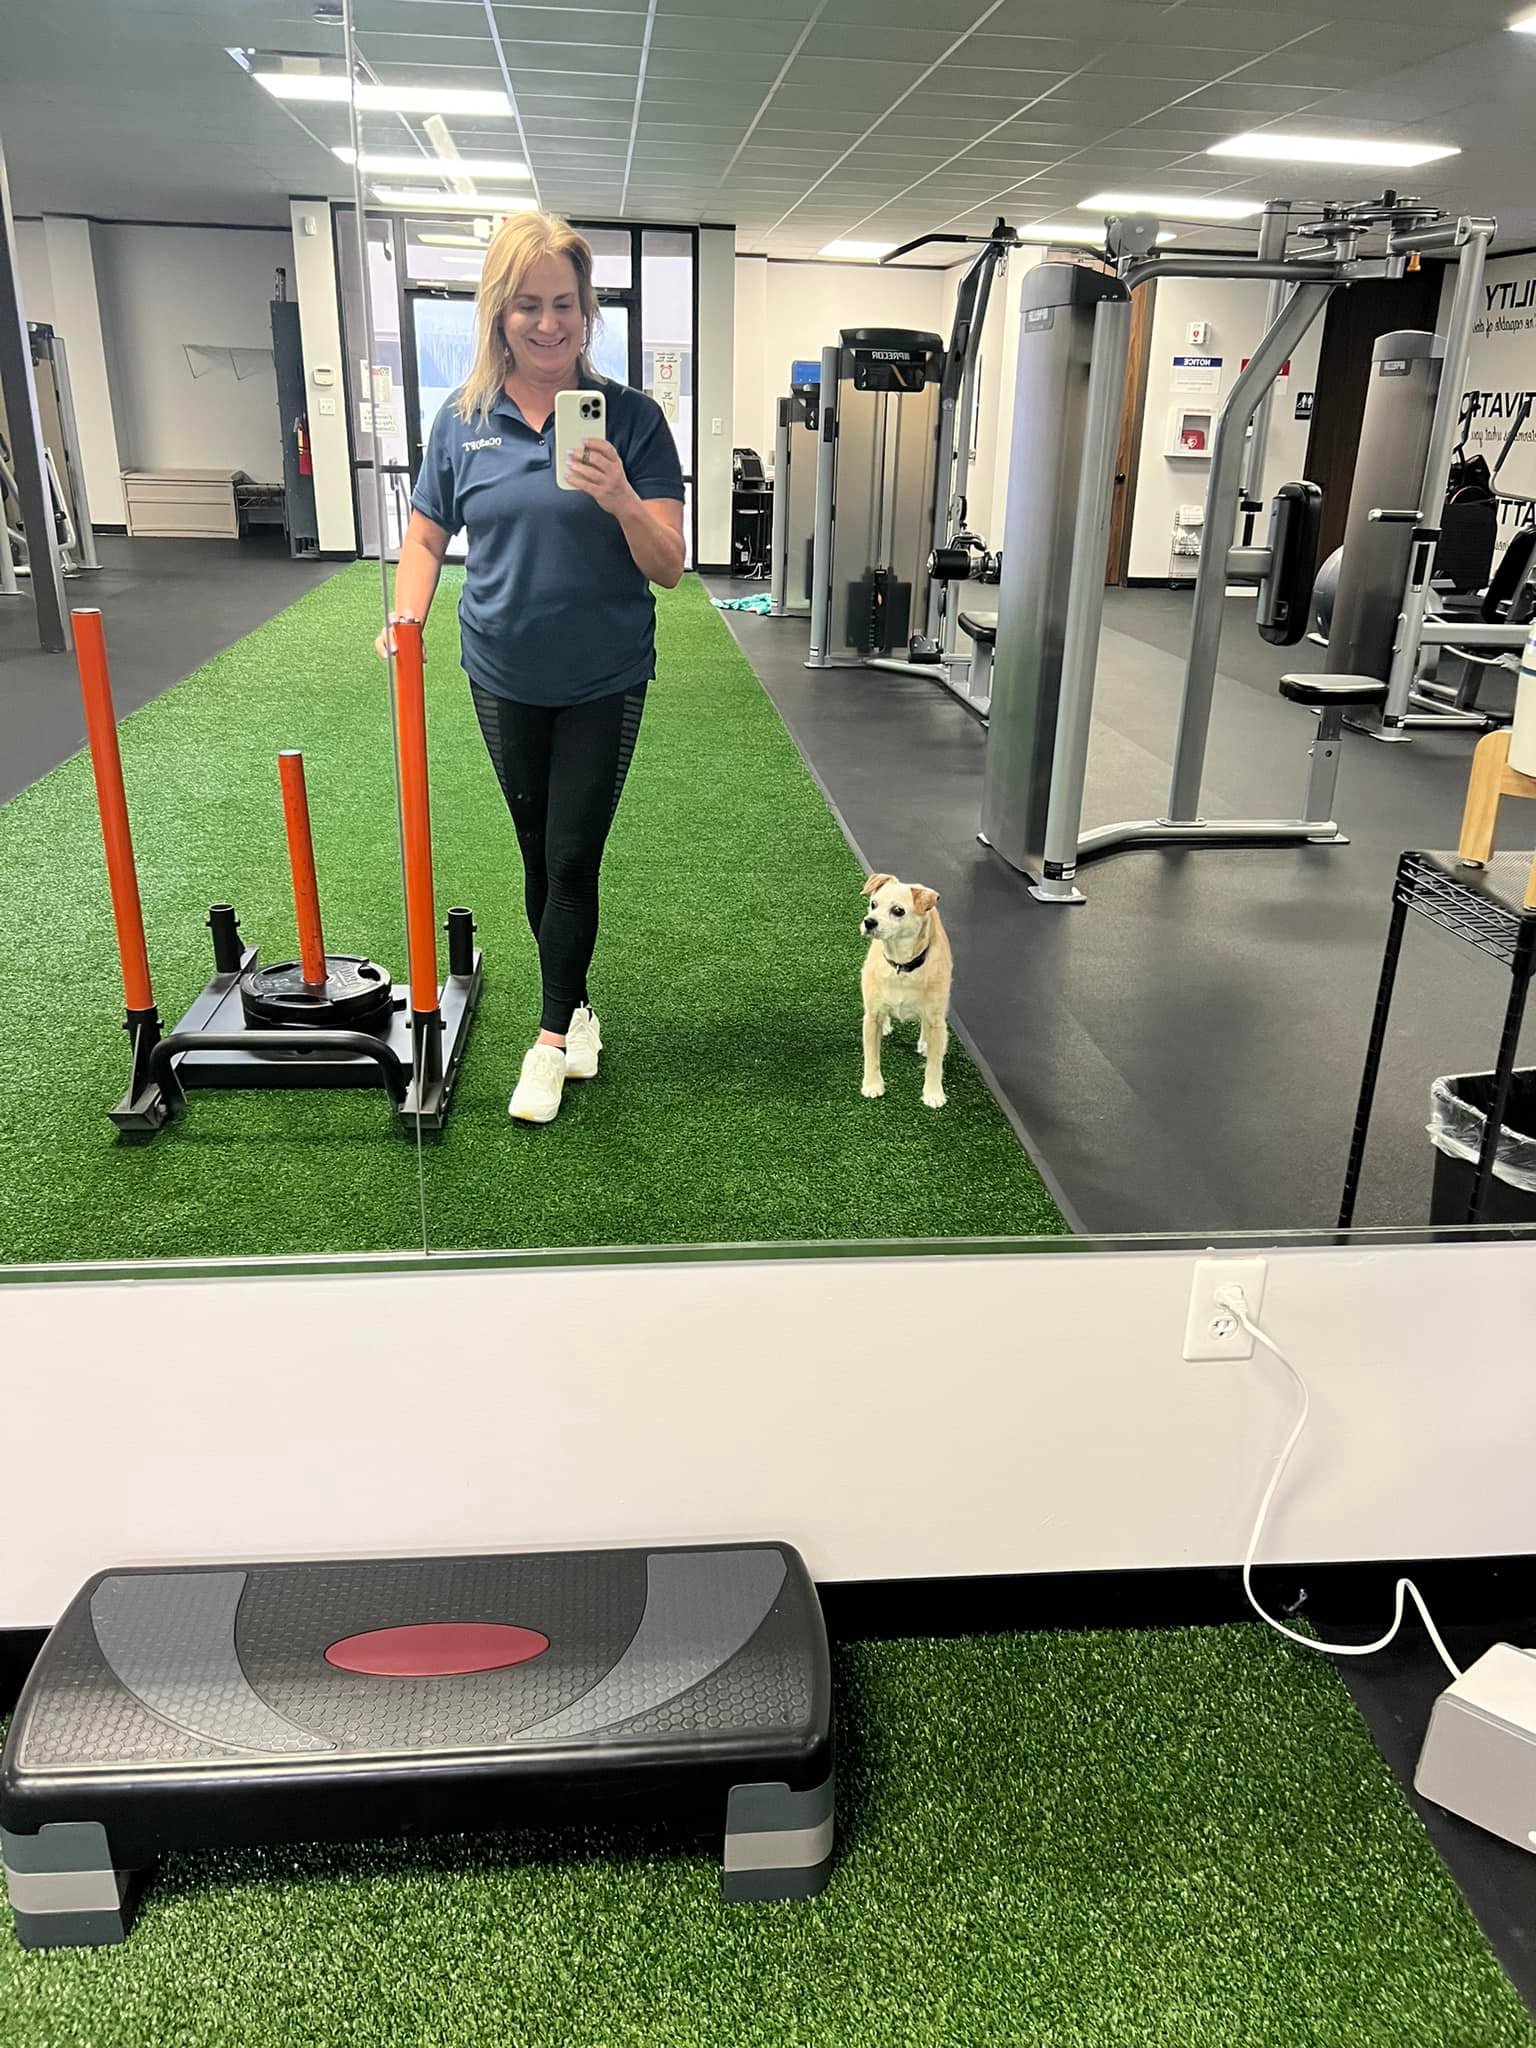 I took Rusty to work with me today. He loves it and he gives high fives for great workouts just like his momma. ♥️